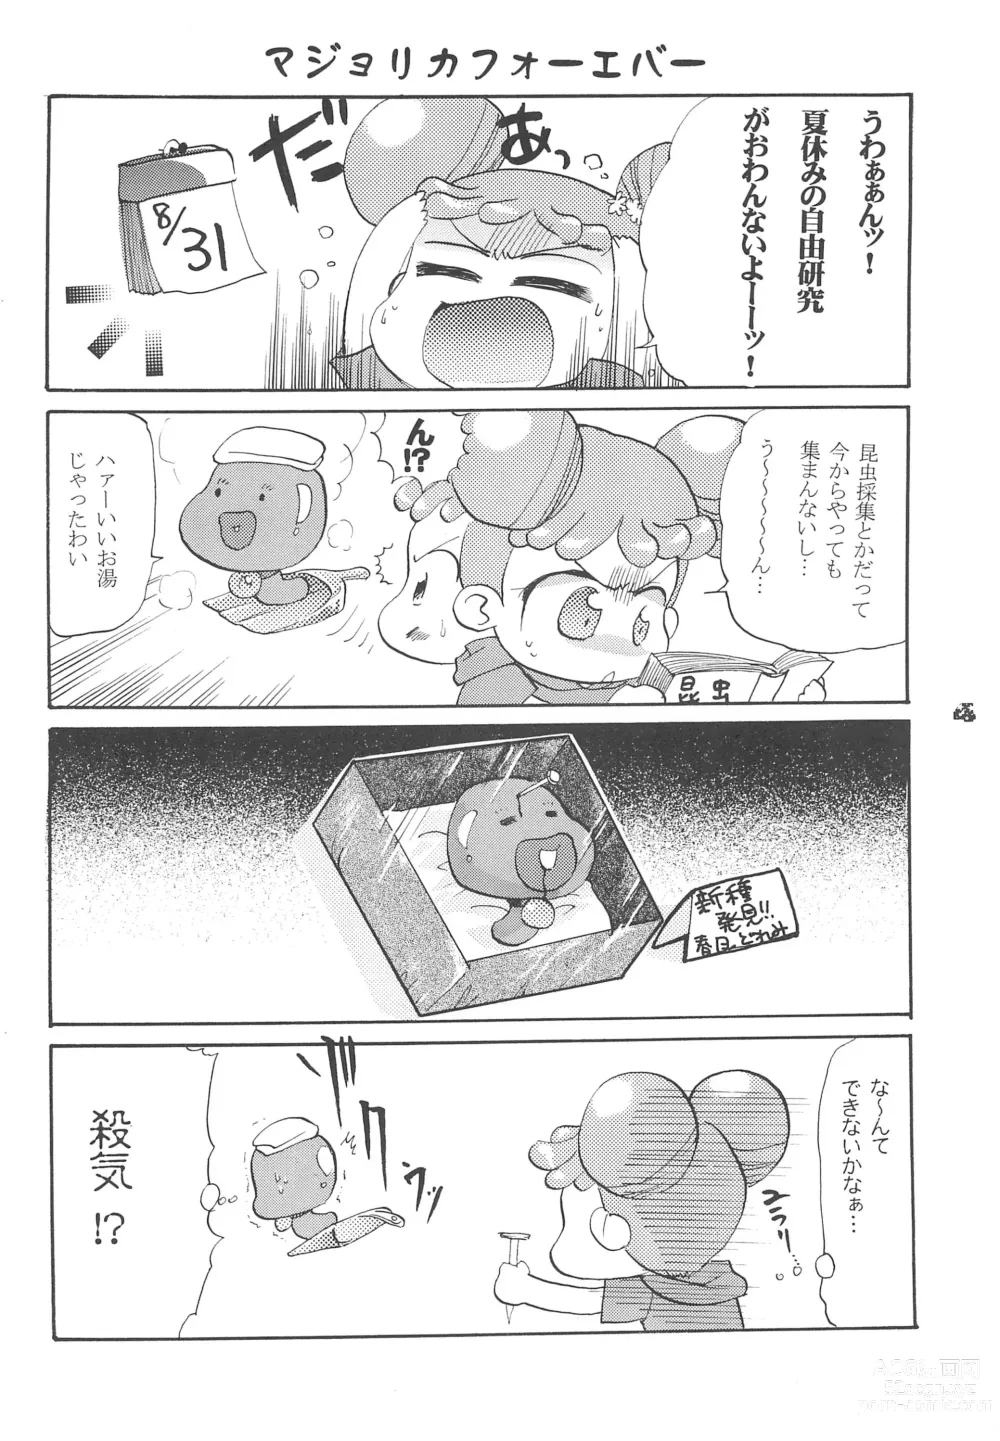 Page 6 of doujinshi Twinkle Melody